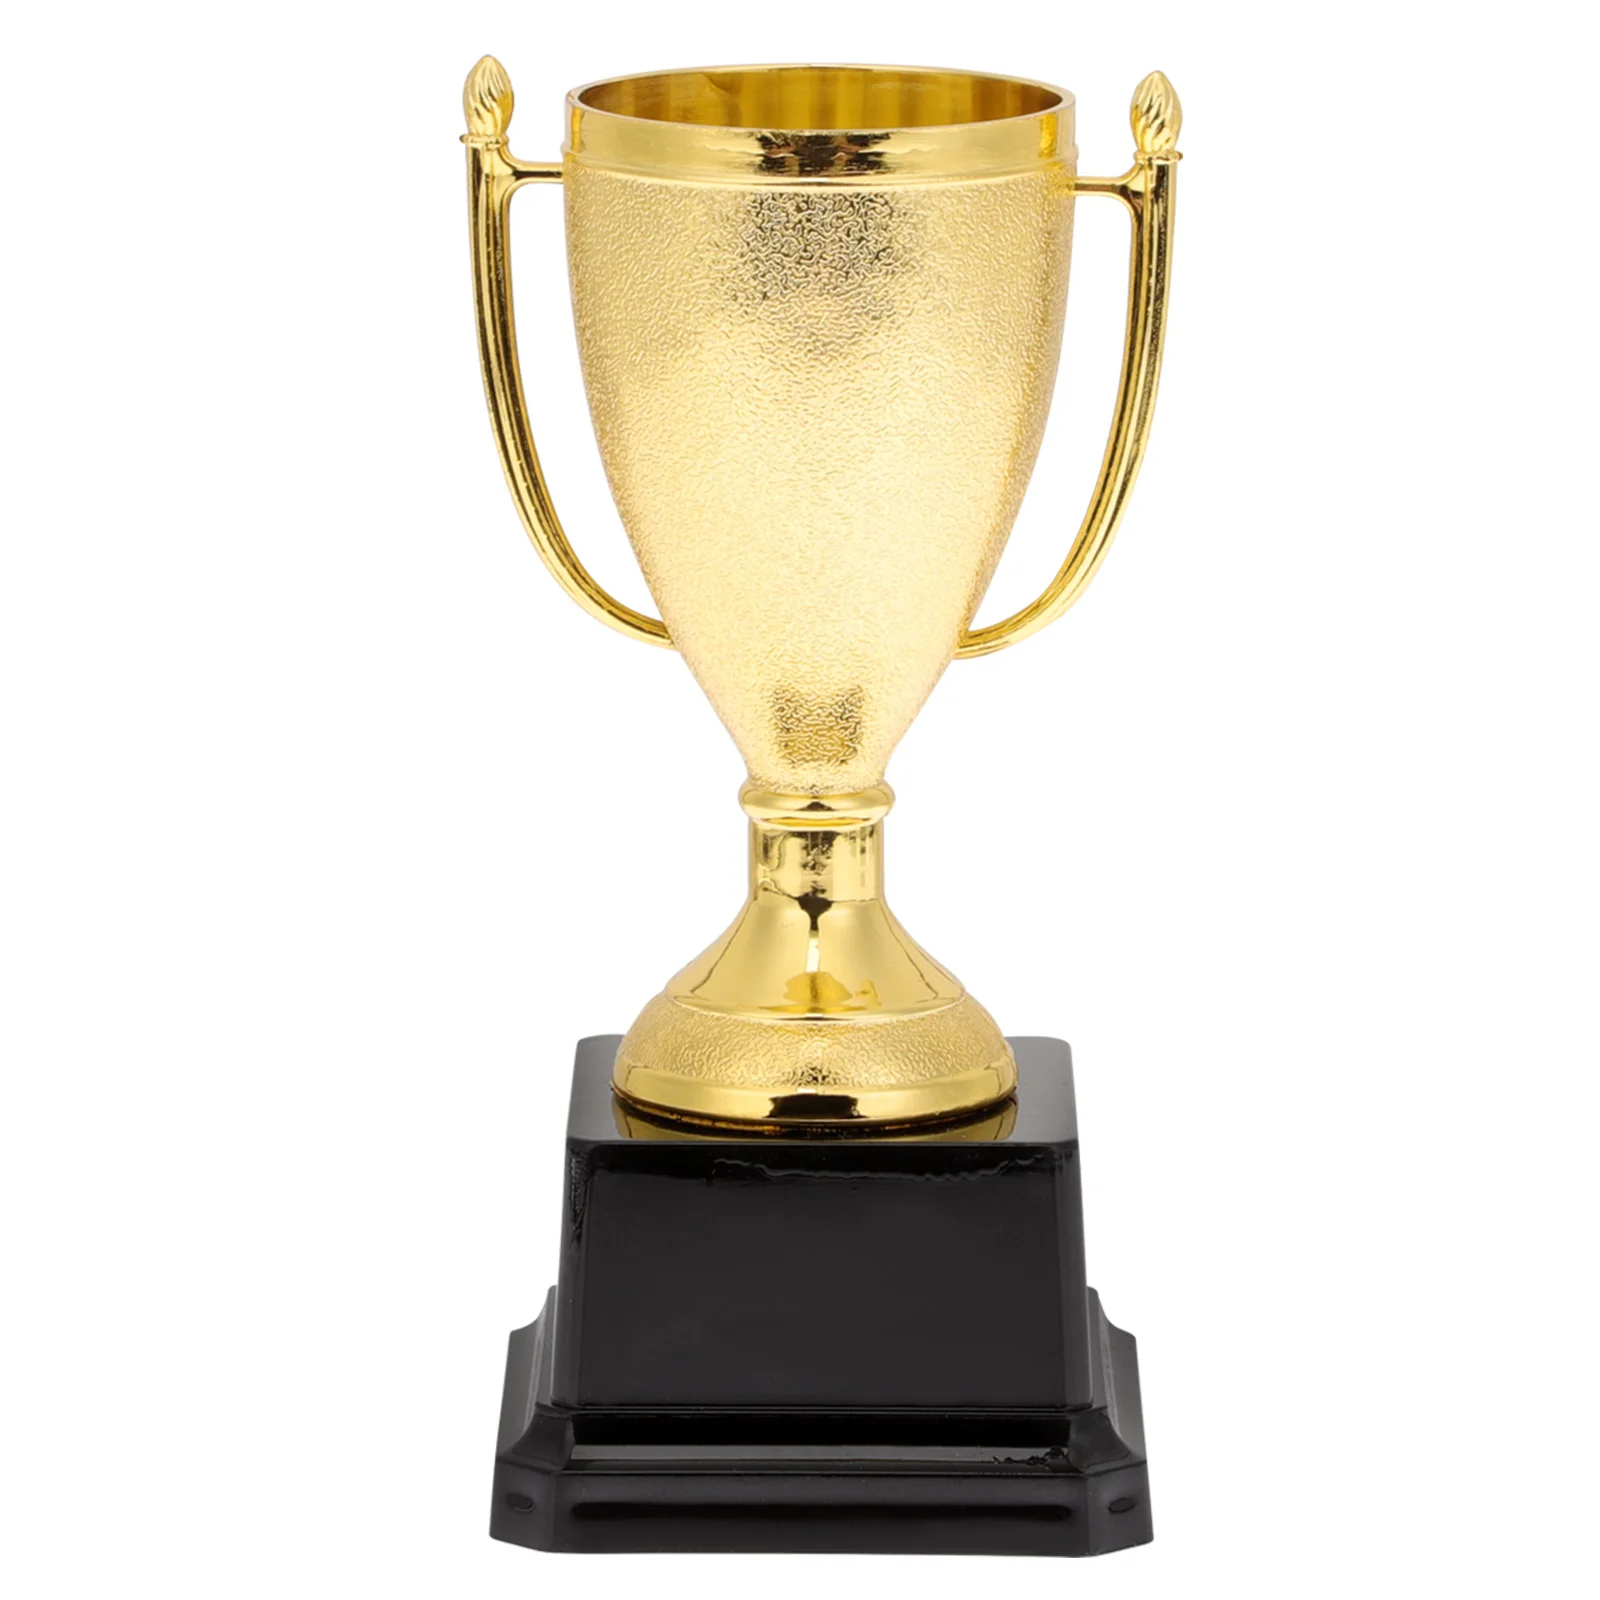 

Trophy Trophies Award Kids Awards Sports Cup Gold Cups Golden Party Medals Events Favors School Small Props Prizes Prize Winning